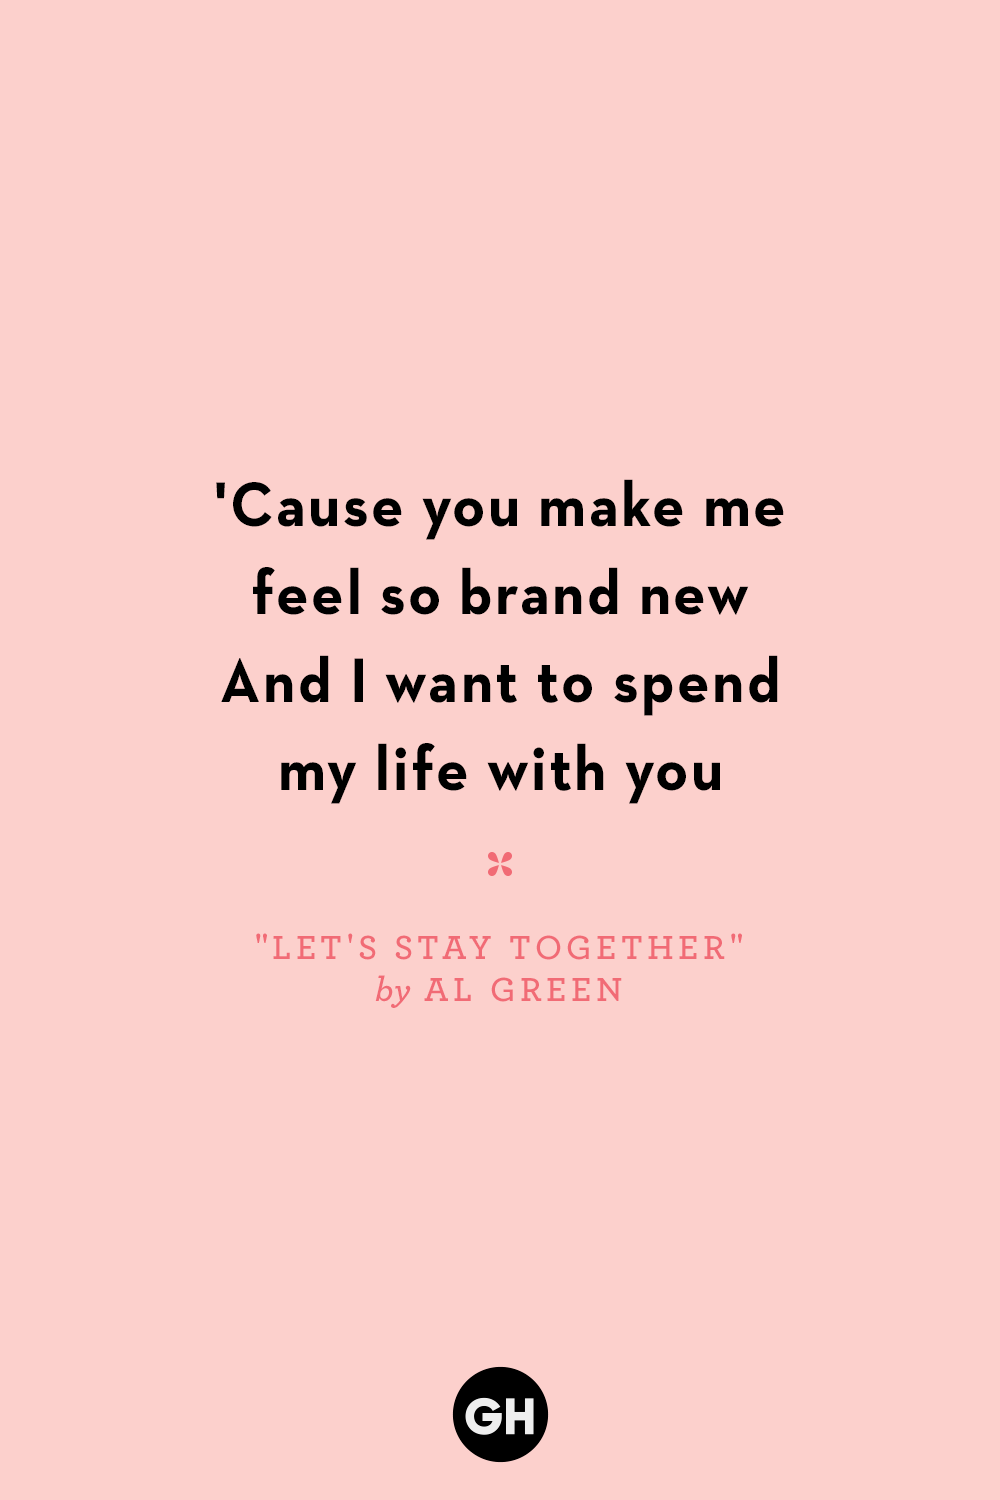 18 Best Love Song Quotes - Romantic Song Lyrics That Say I Love You